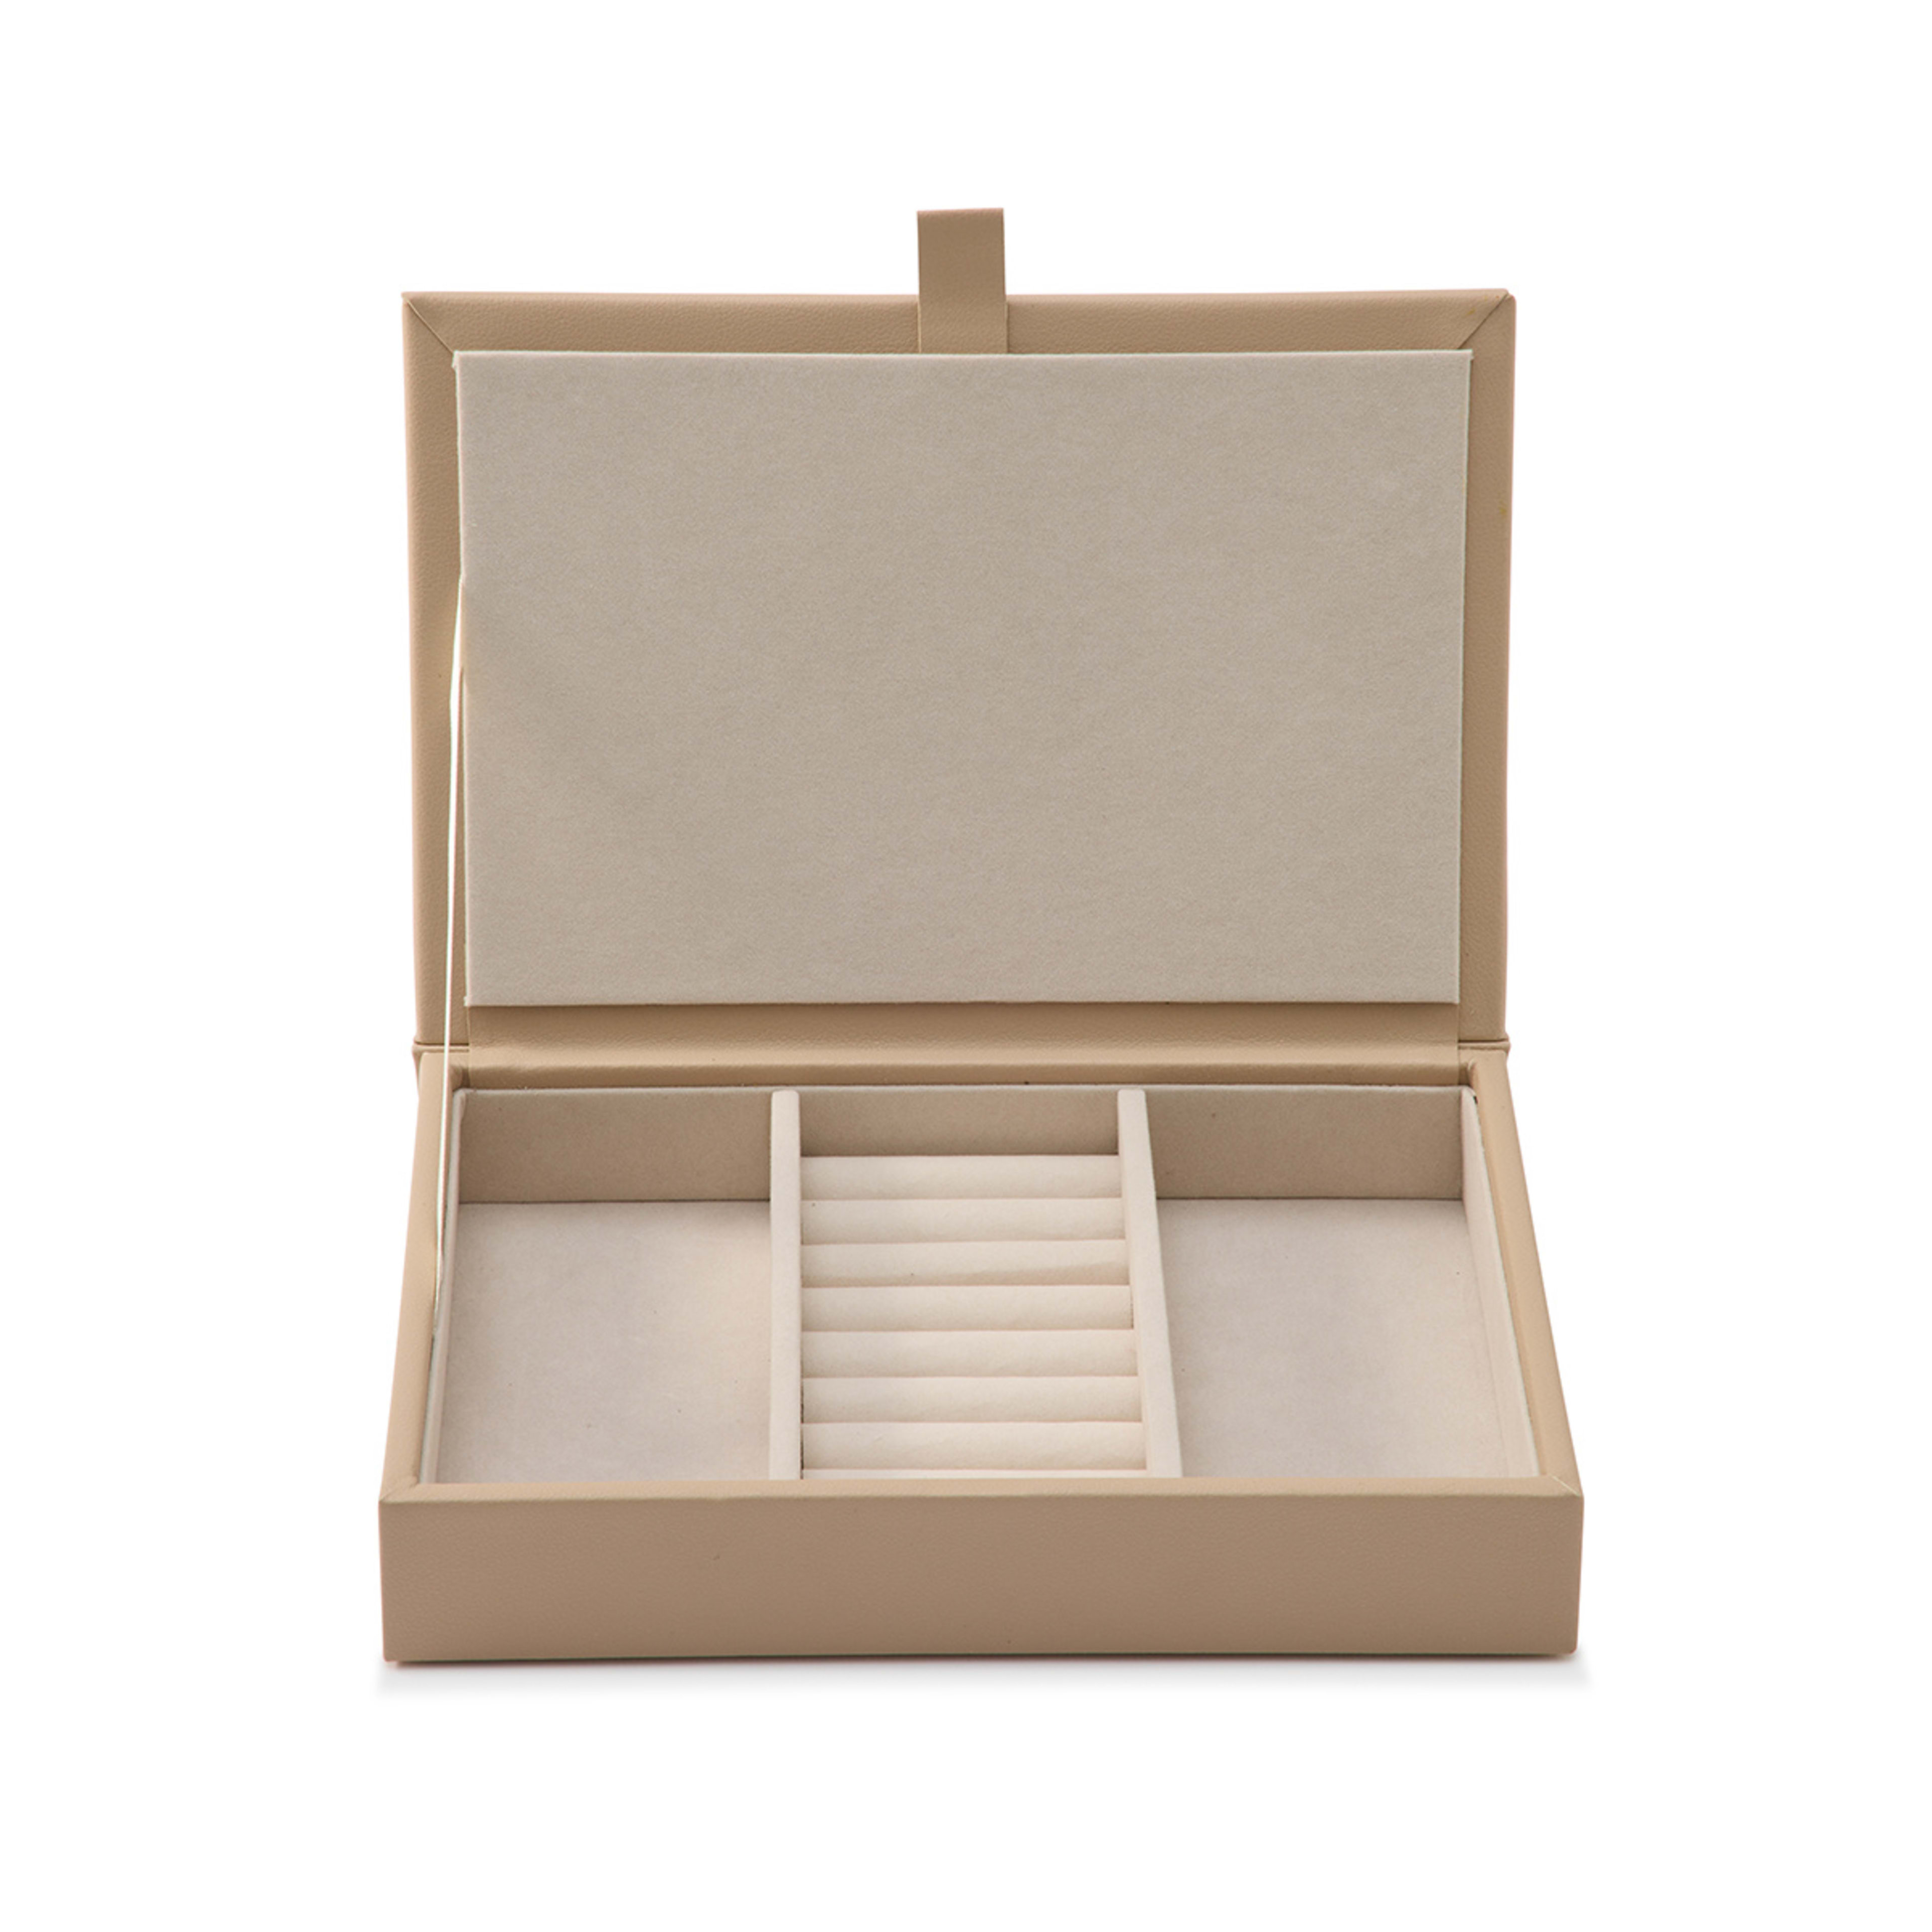 Jewellery Box with Lid - Taupe - Kmart NZ